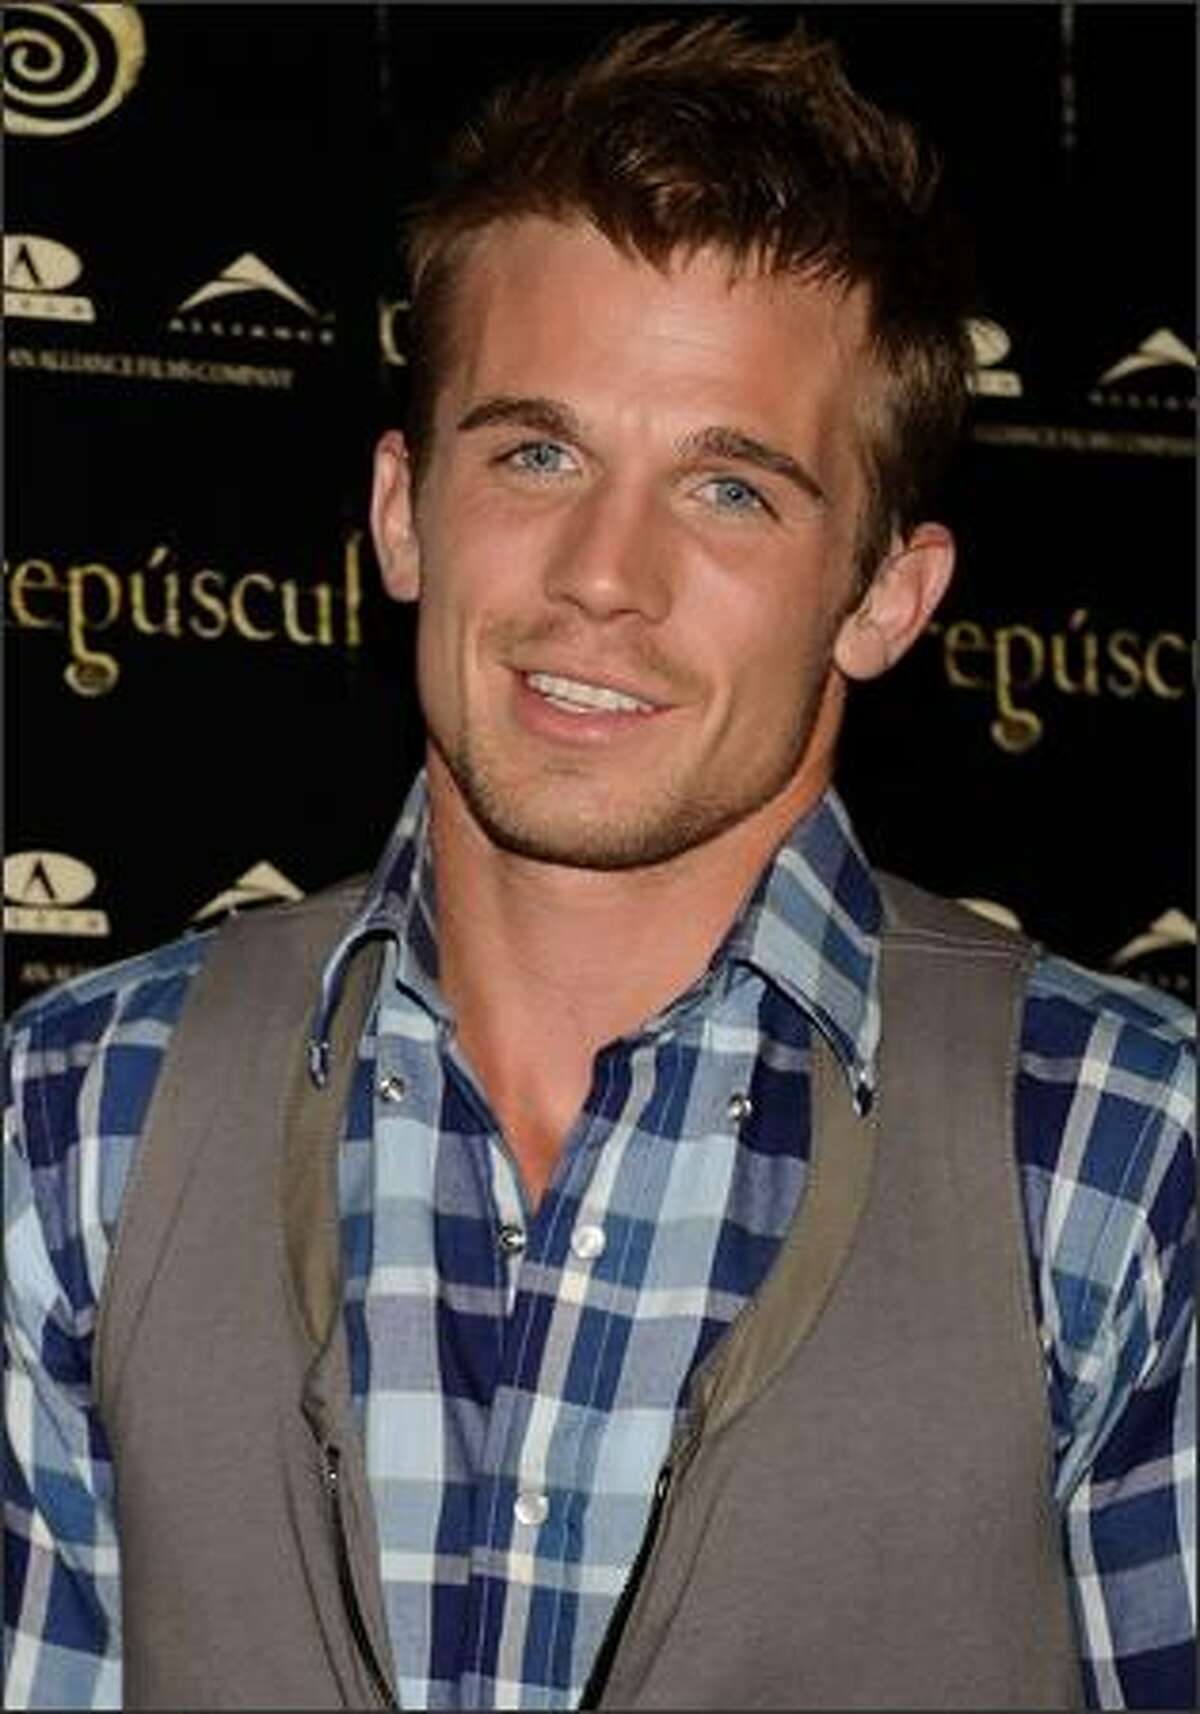 Actor Cam Gigandet attends "Twilight" photocall at the Hotel ME on Monday in Madrid, Spain.